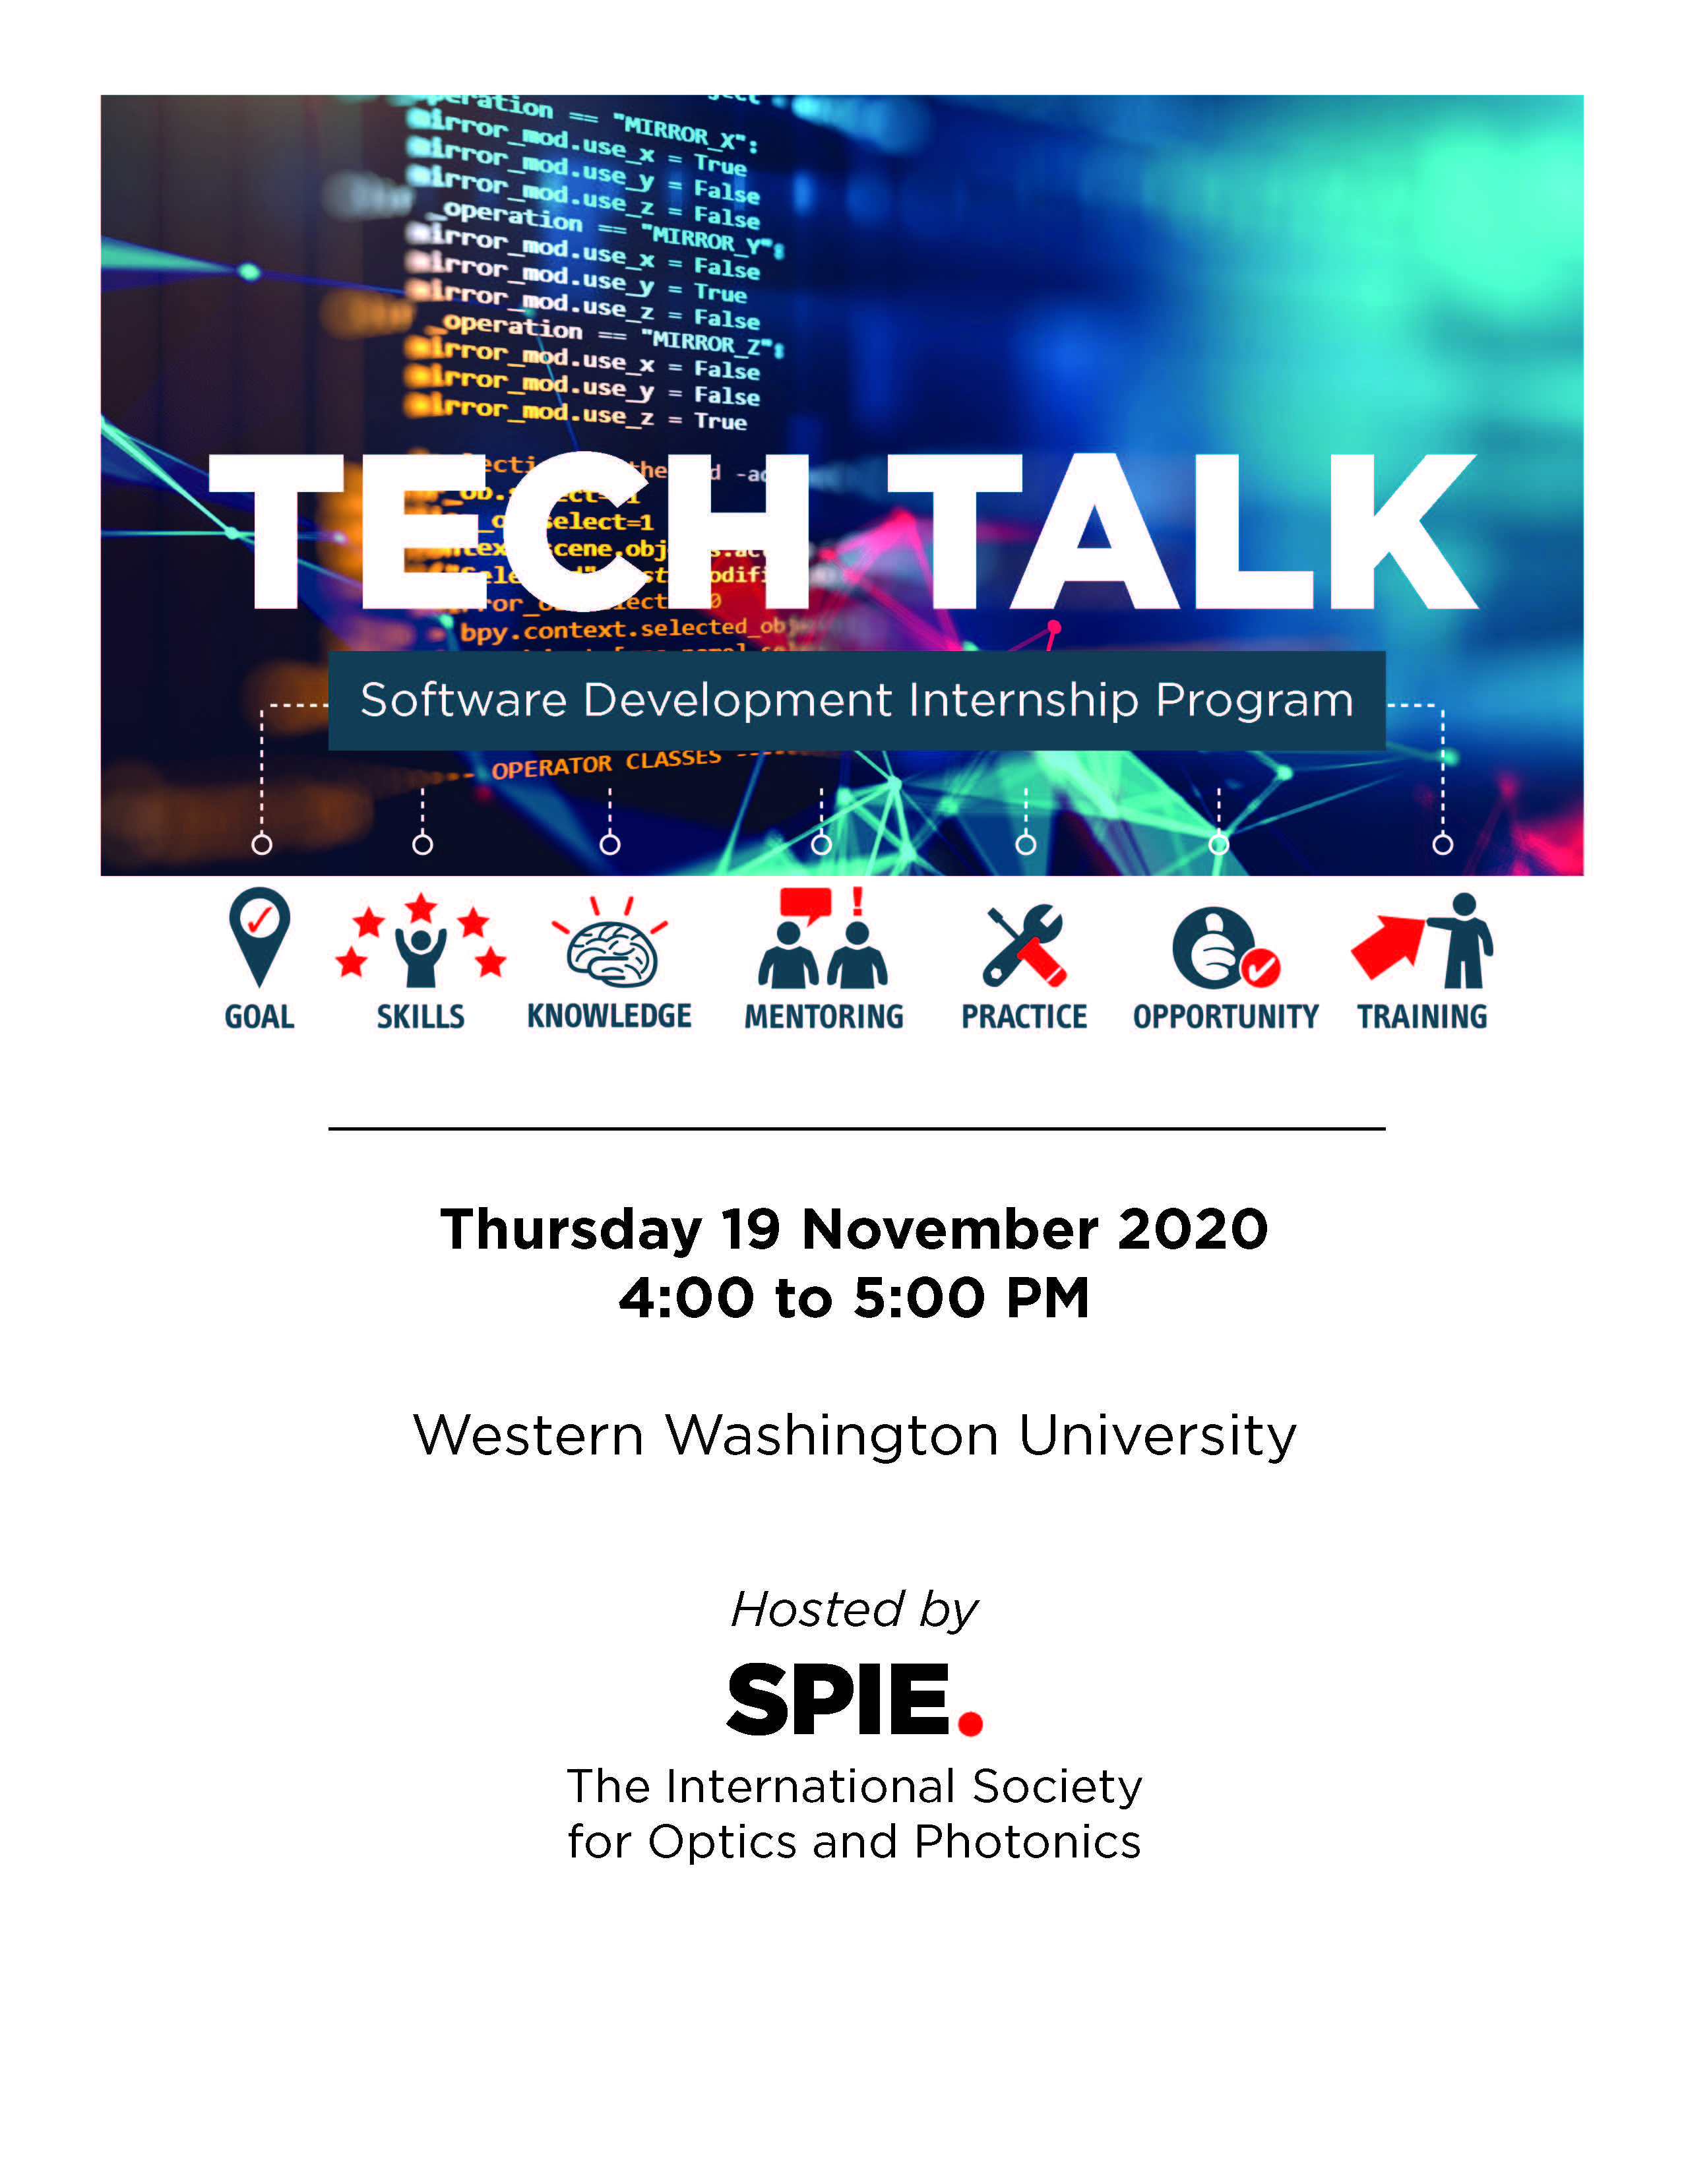 Poster for Tech Talk with SPIE